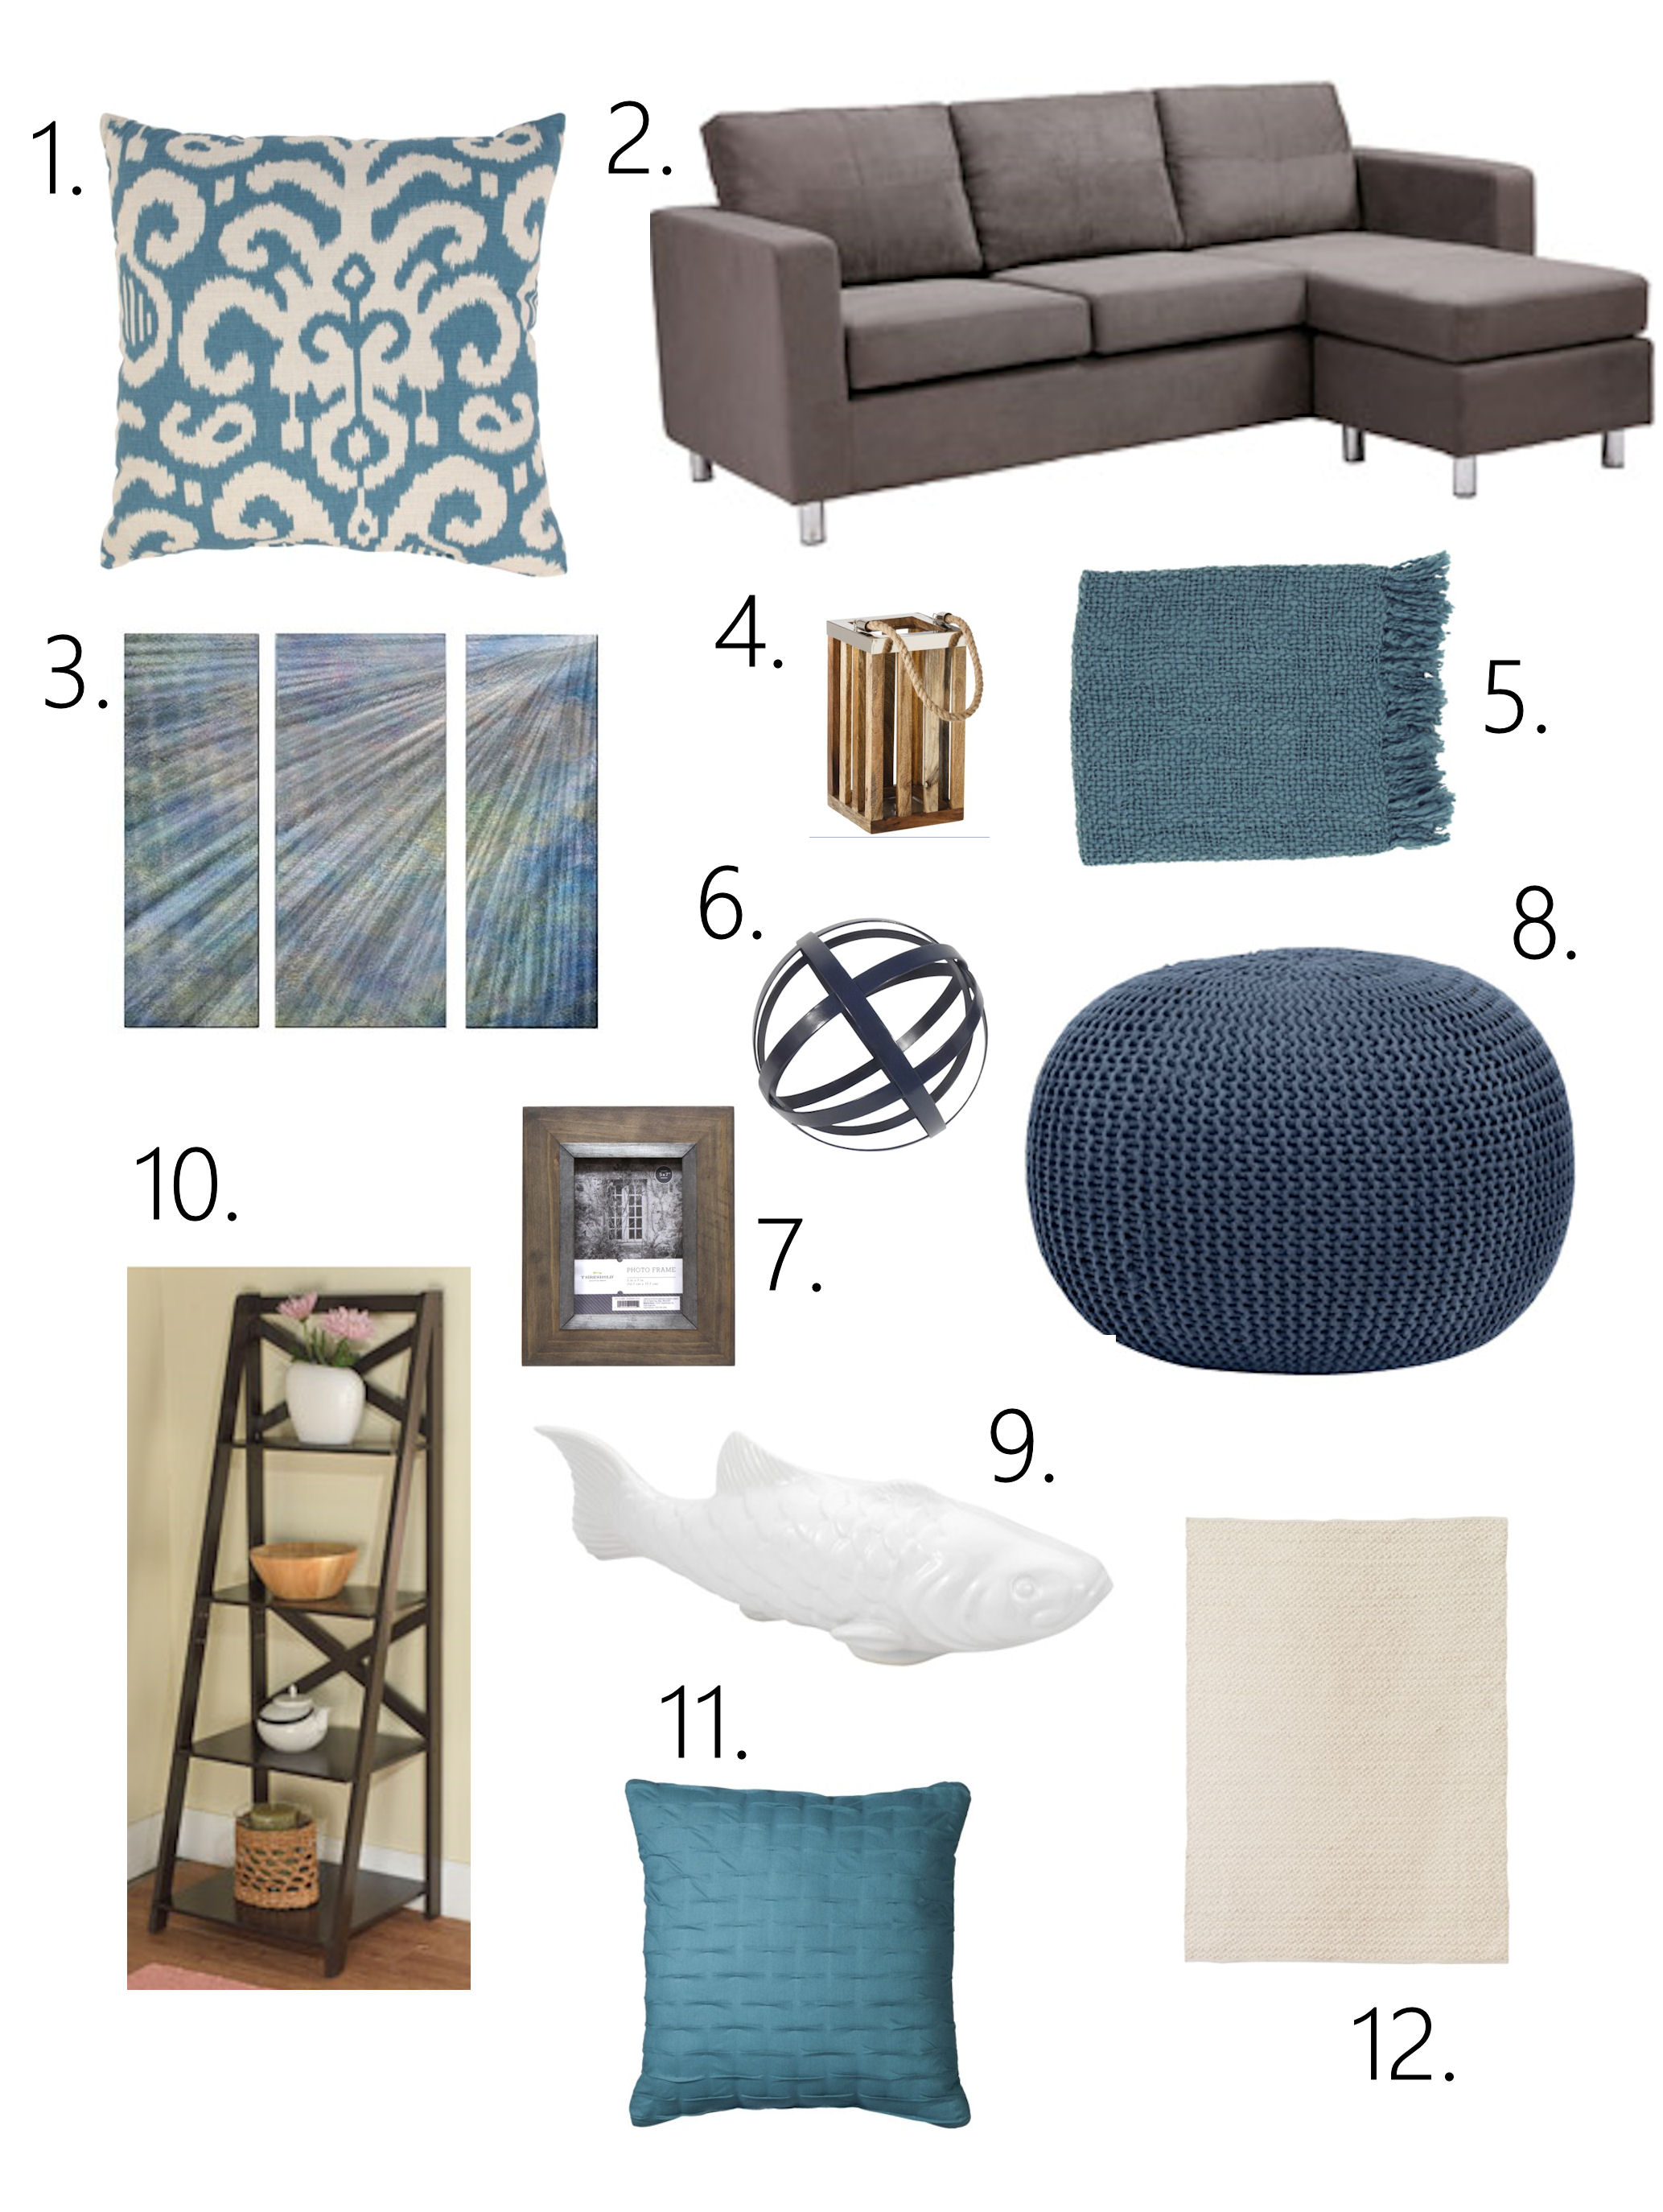 Affordable eDecor Series-Living Room in Grays and Blues